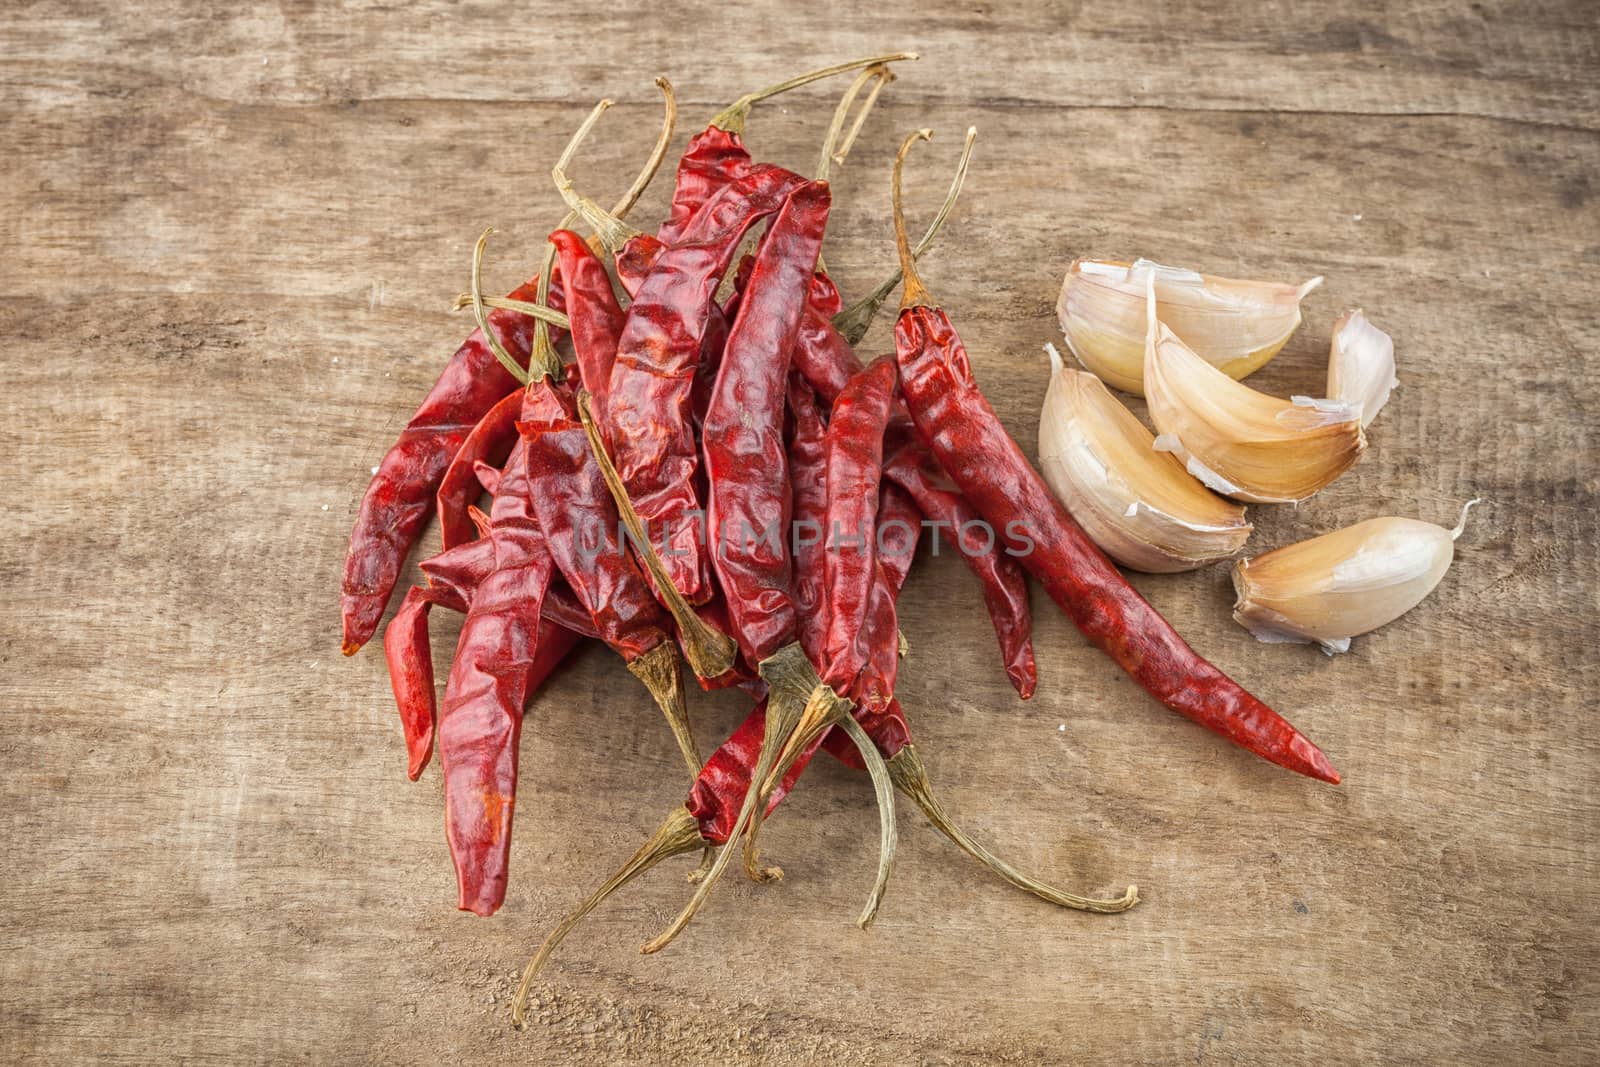 Dried red chili pepper and fresh garlic on wooden background by nopparats